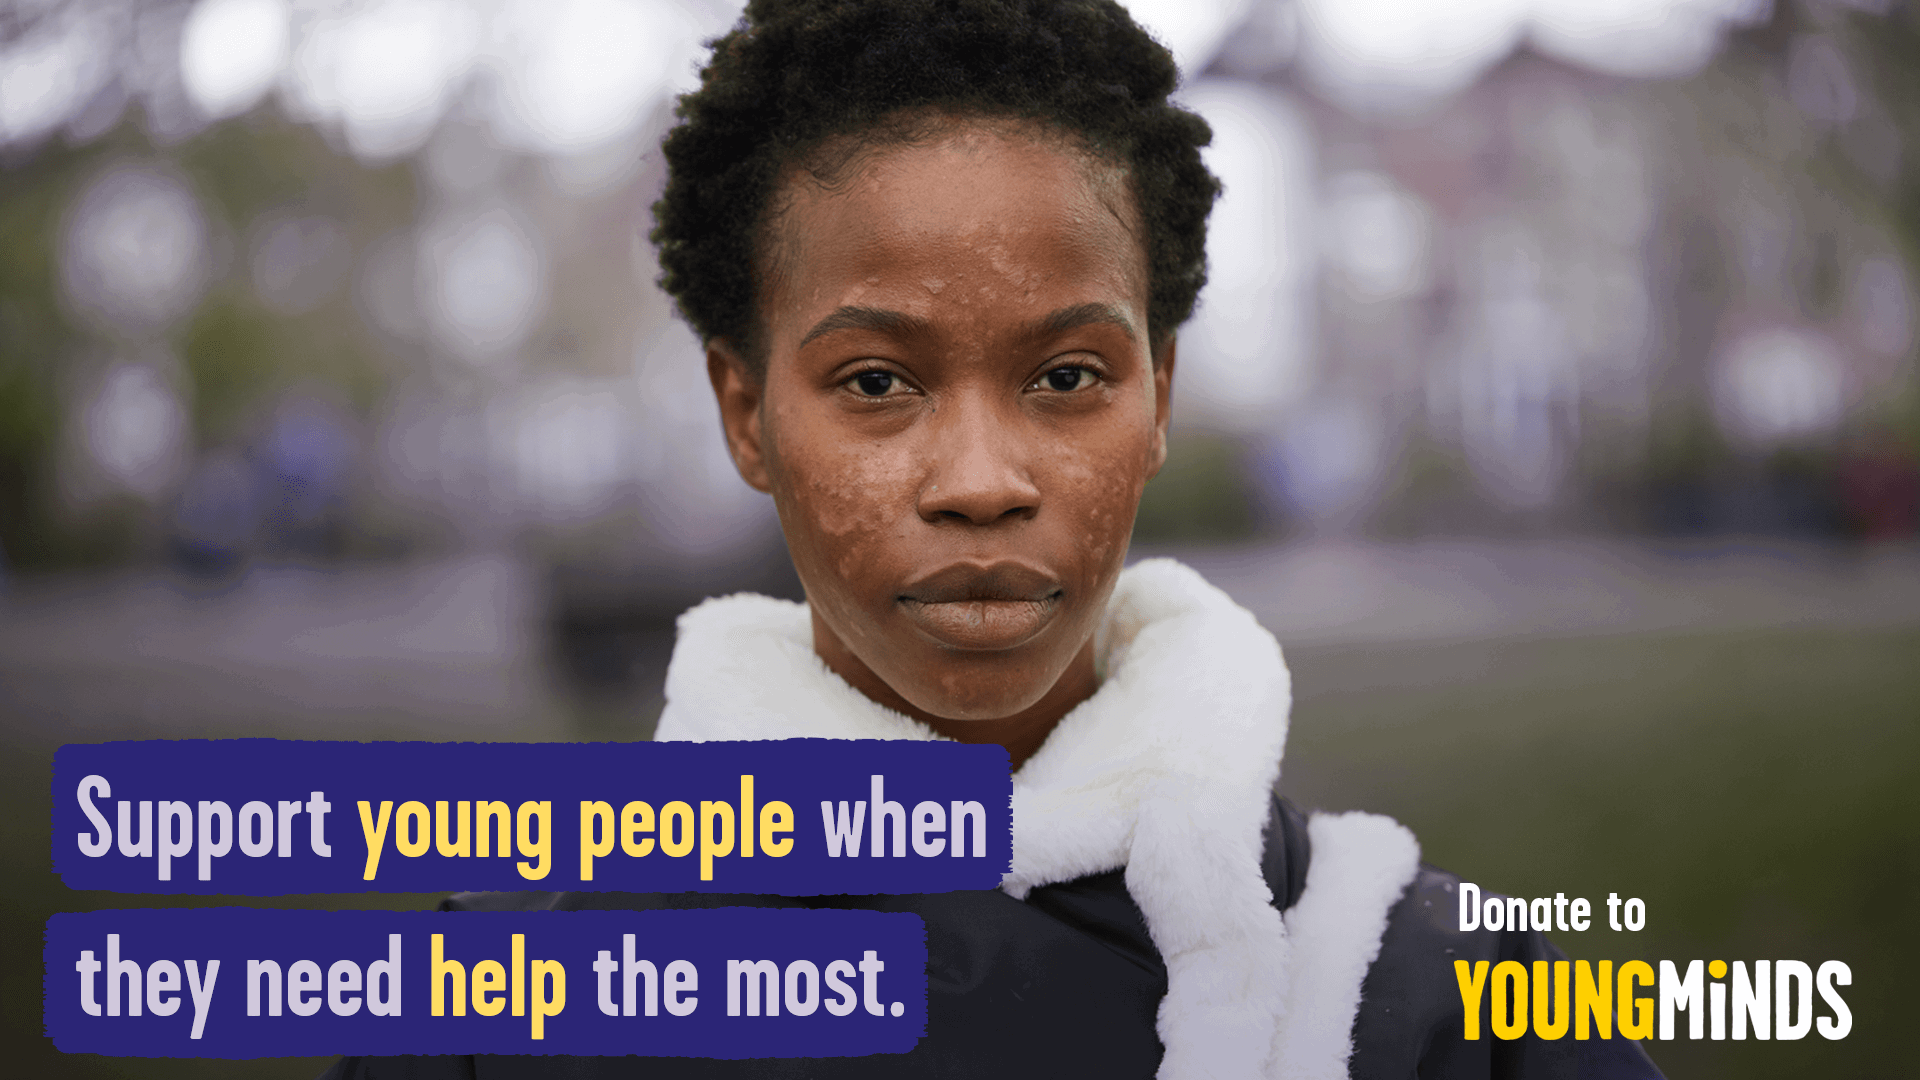 A young person is sitting on a bench, looking seriously straight at the camera. They wear a jacket with white fur. On the image are the words in purple and yellow 'support young people when they need help the most.' In the bottom right, it says 'Donate to YoungMinds'.